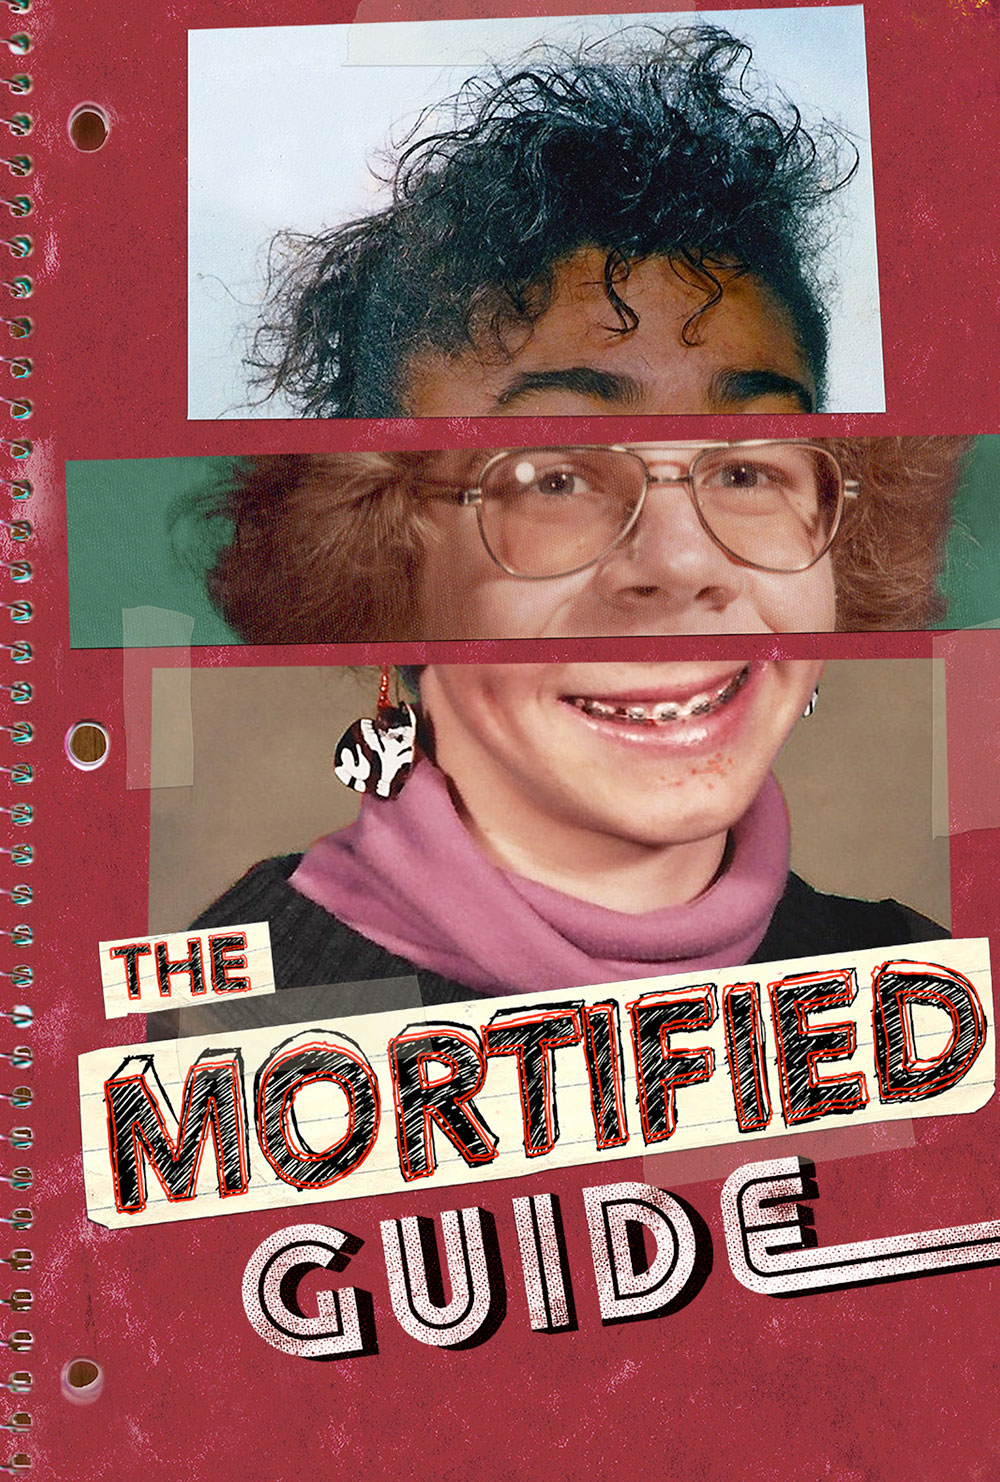 Mortified Guide, The